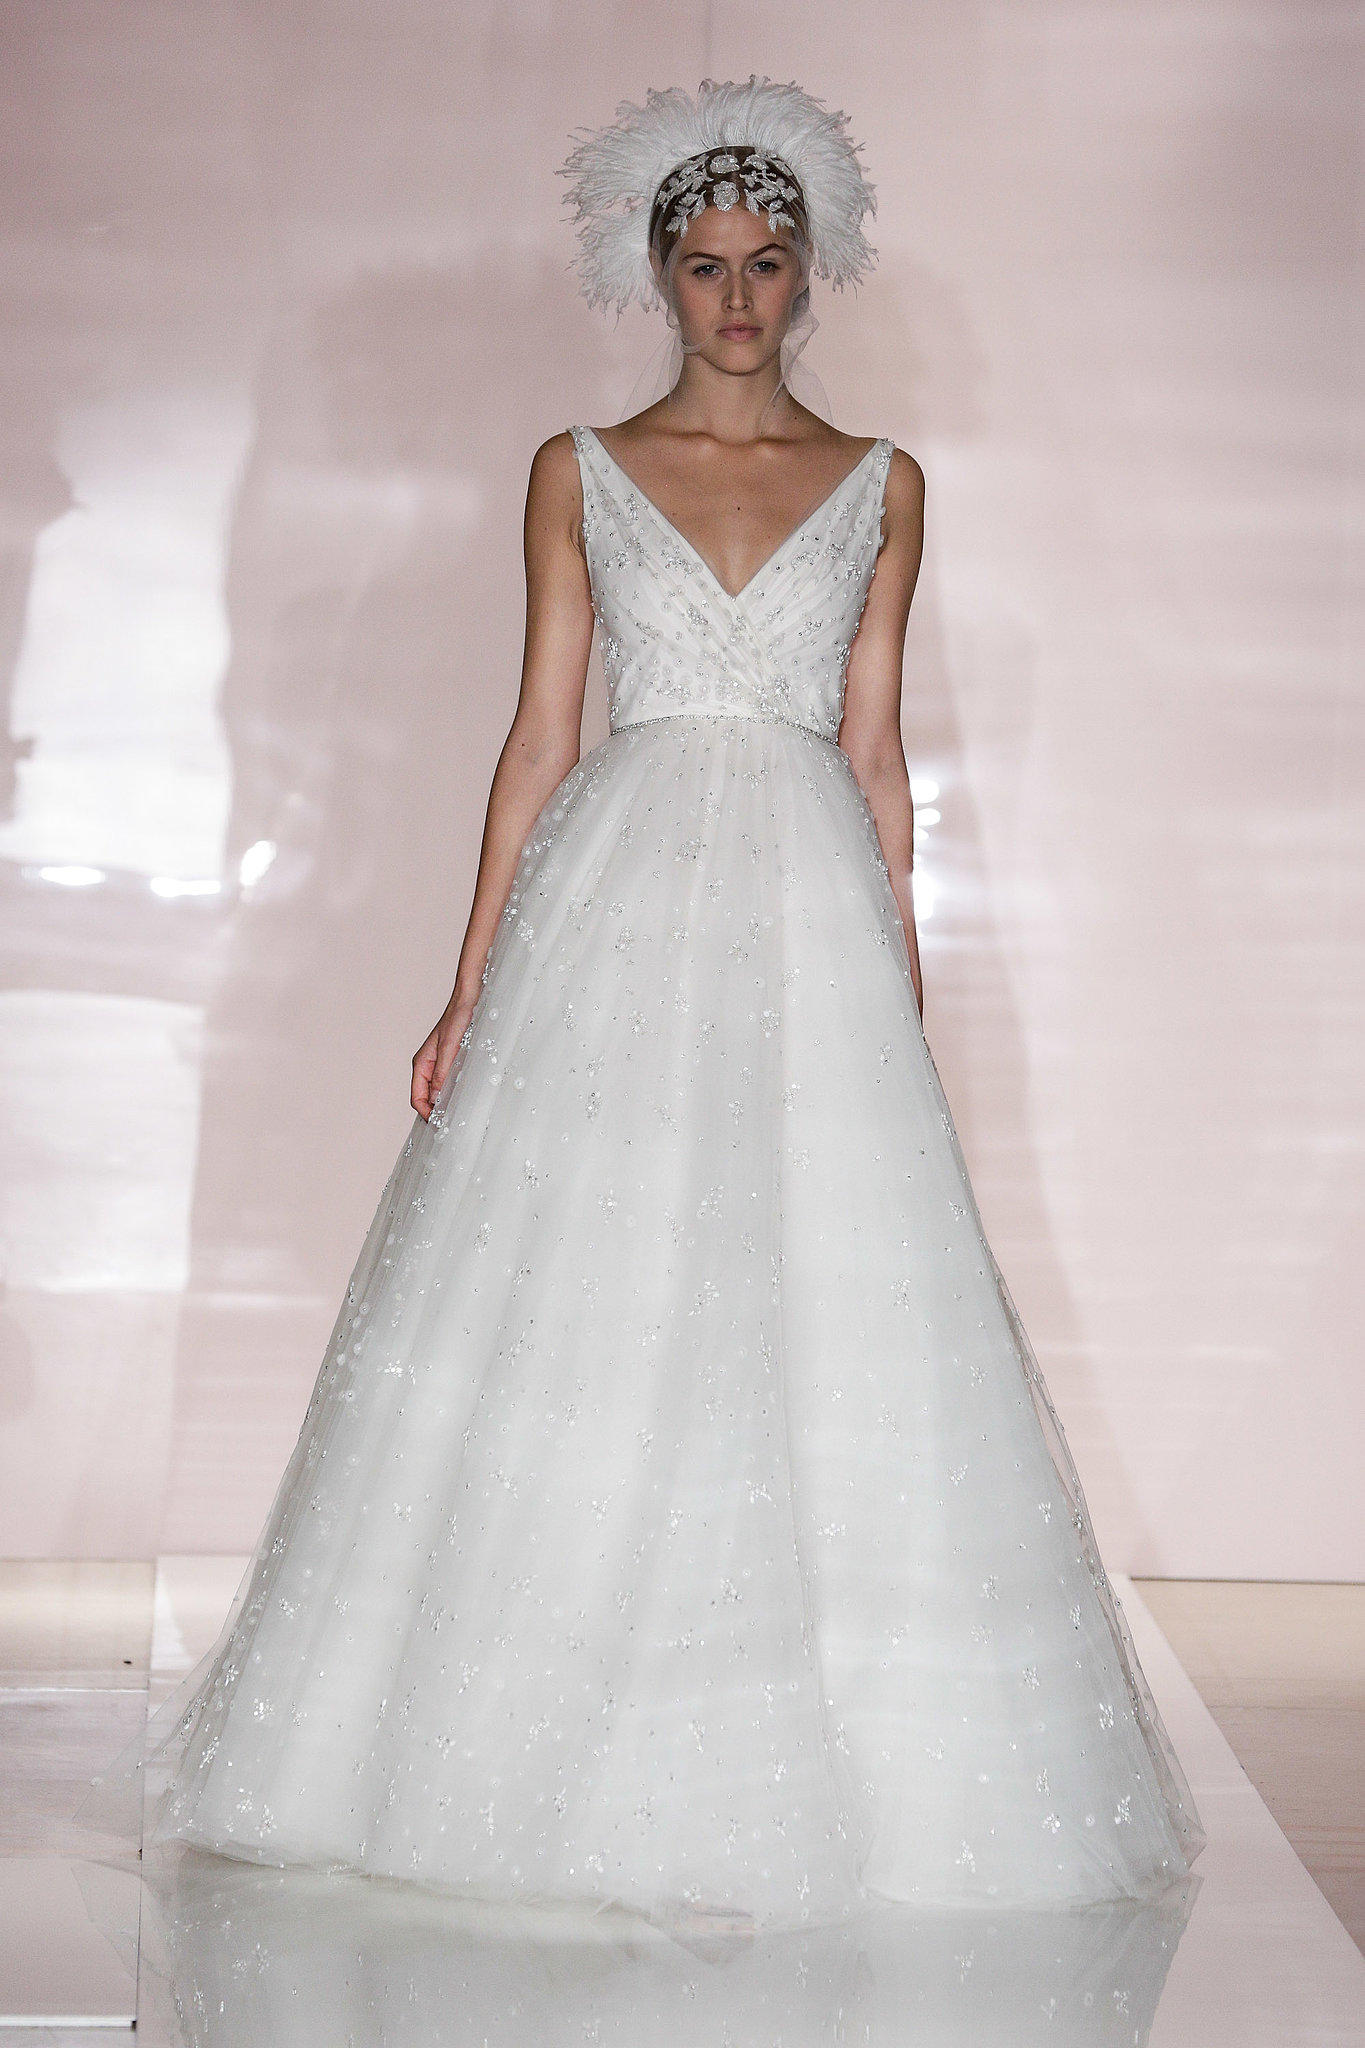 Reem Acra Bridal Fall 2014 | Reem Acra Bridal Fall 2014: Birds of a ...